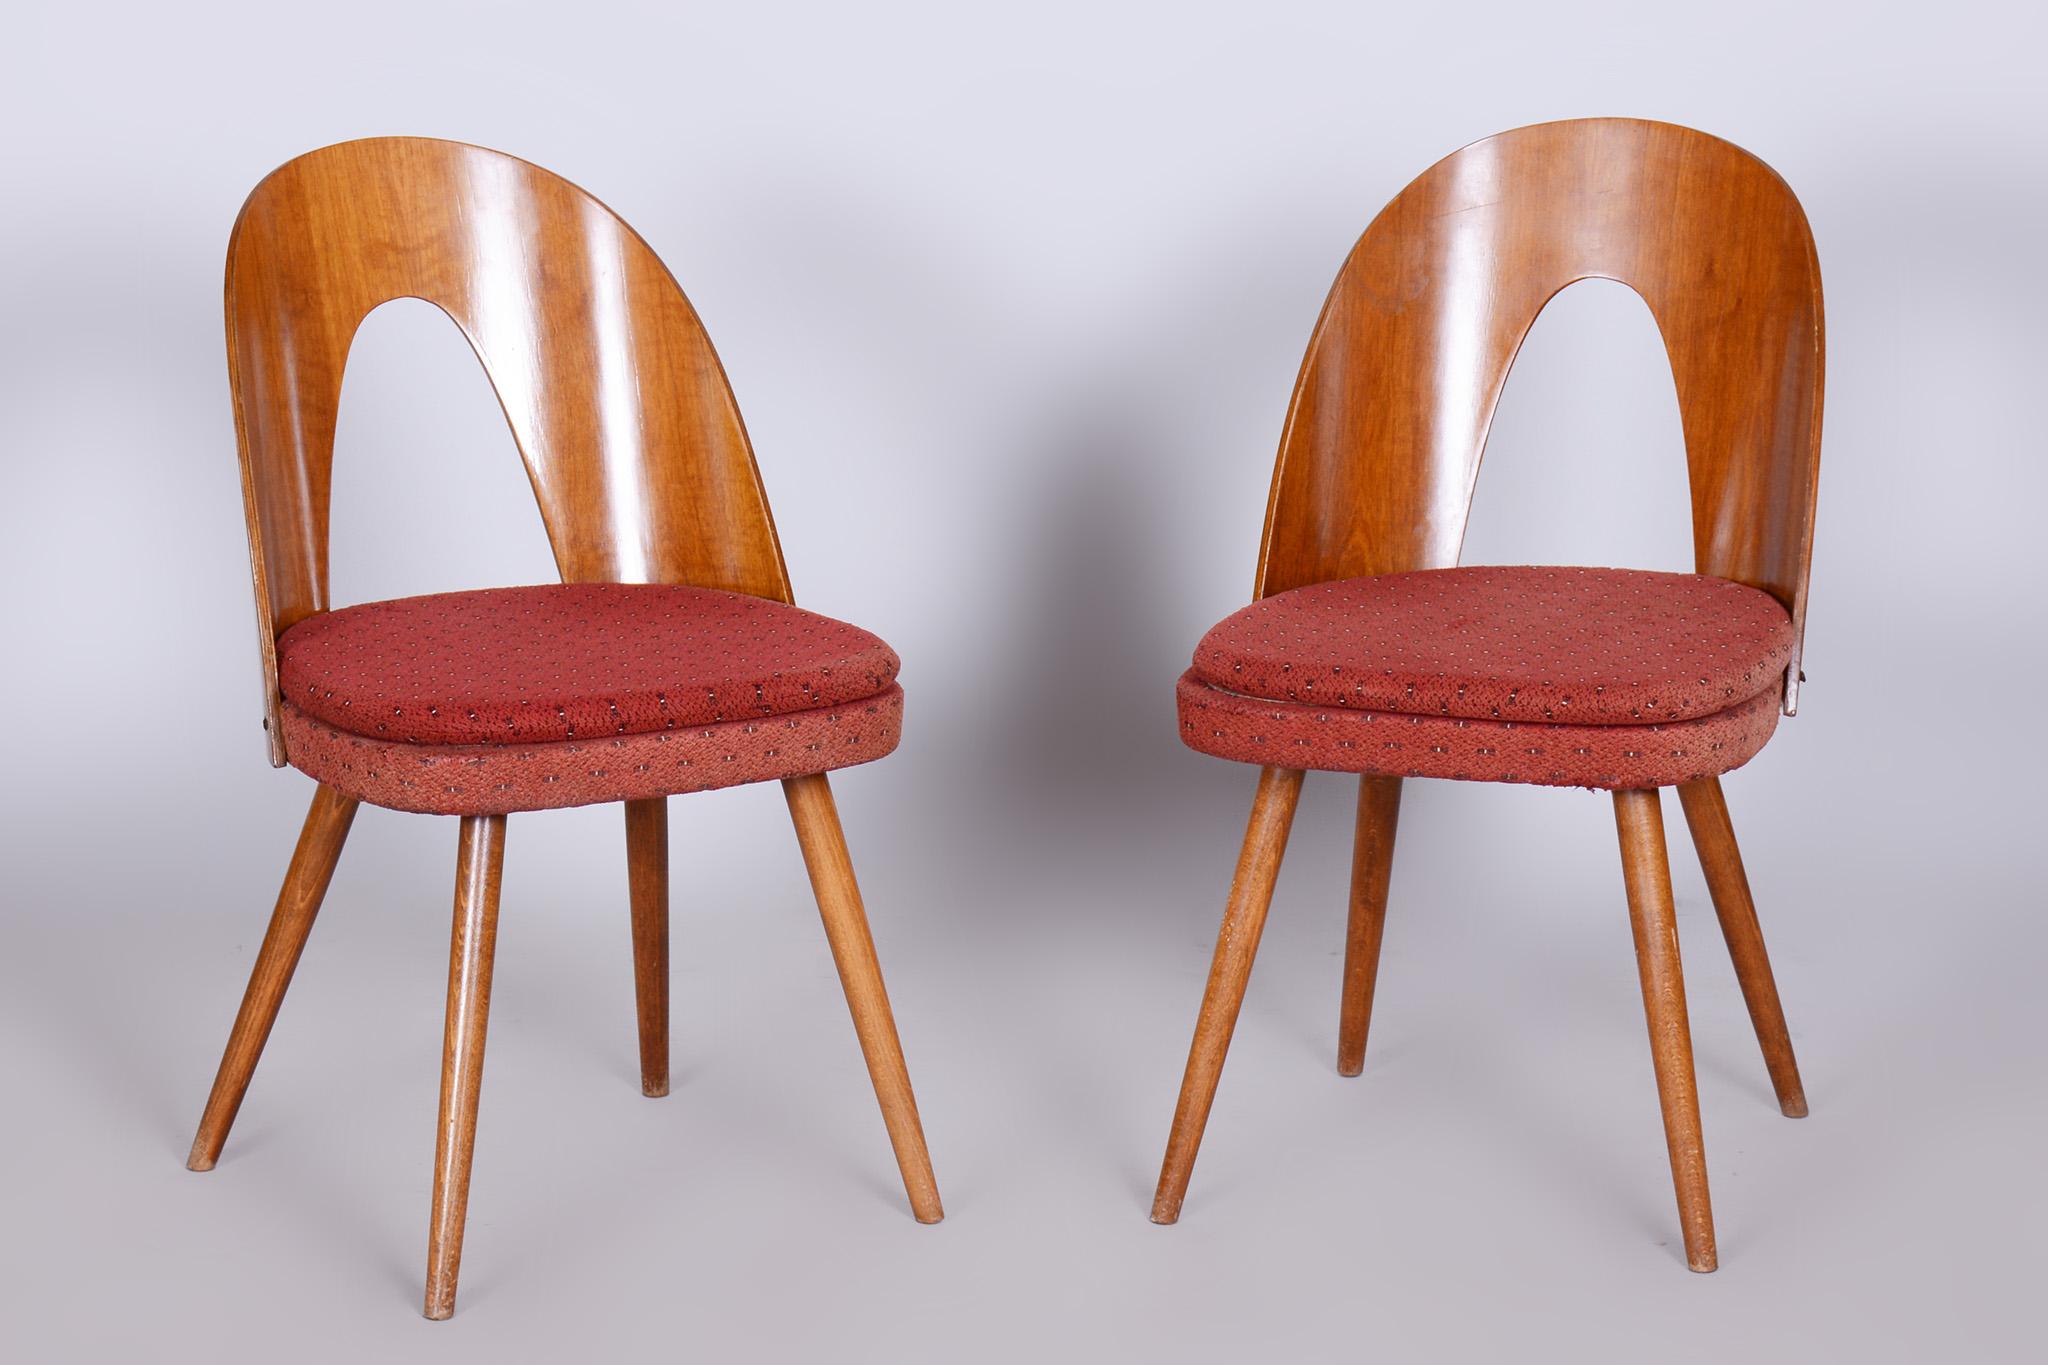 Designed by renowned Czech Mid-Century Modern designer Antonín Šuman. 

Period: 1950-1959
Source: Czechia
Materials: Beech, Walnut, Fabric.

Very well-preserved condition.
Revived varnish.
Cleaned upholstery.

Sold as a set. 

This item